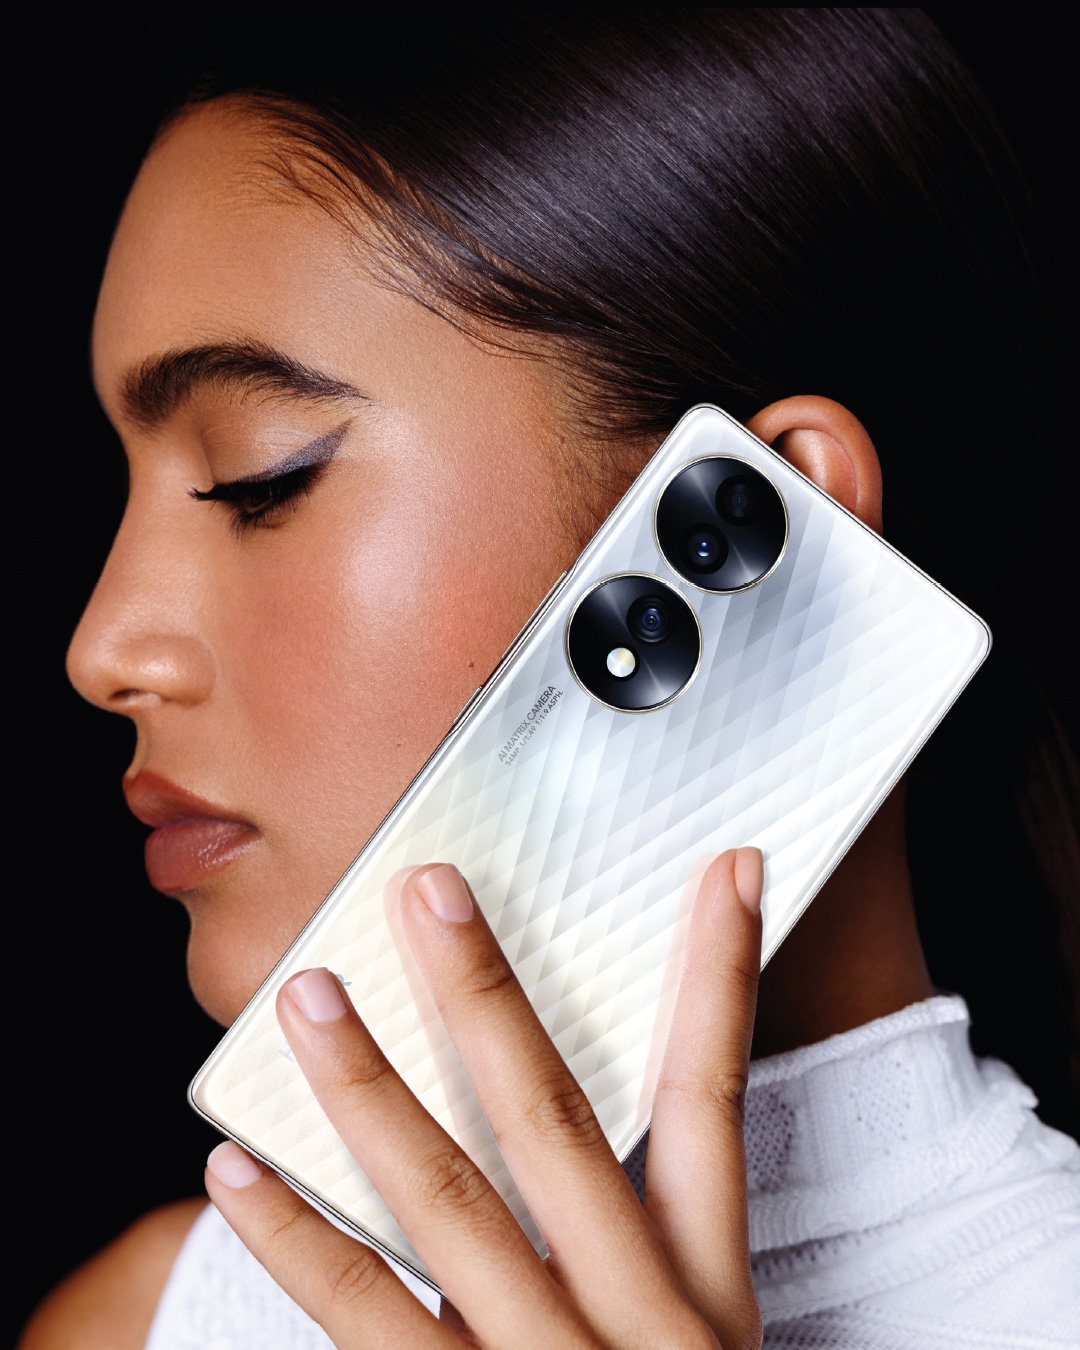 HONOR 70 features in an Artistic Photo shoot in HIA